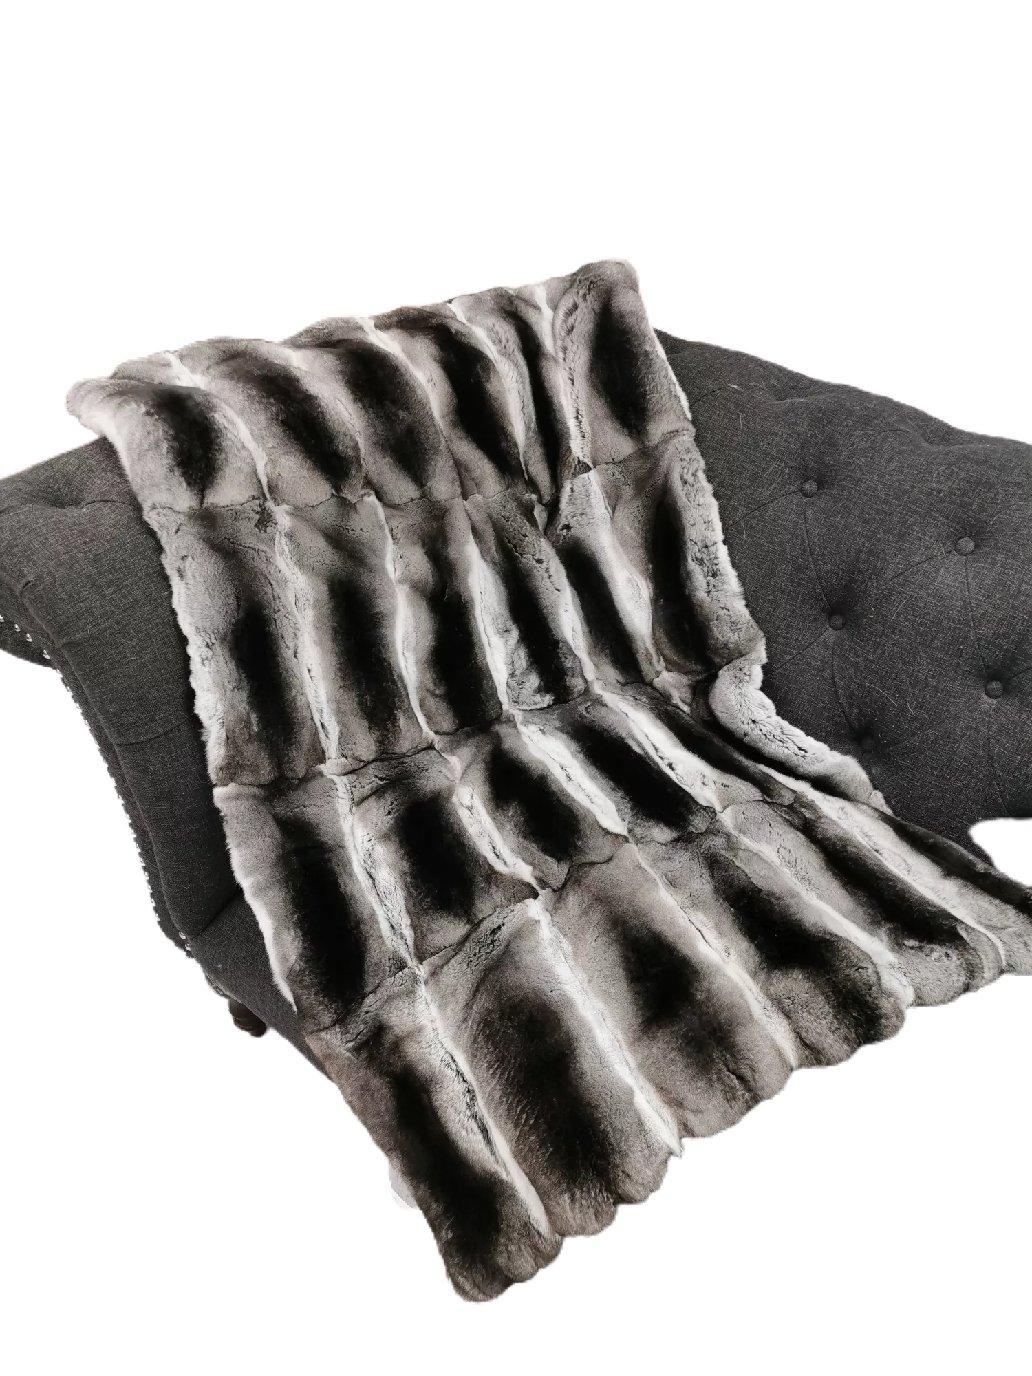 Brand New Natural Chinchilla Fur blanket with a black wool and cashmere lining  (for other lining options please contact us for custom order blankets) 

Size 40